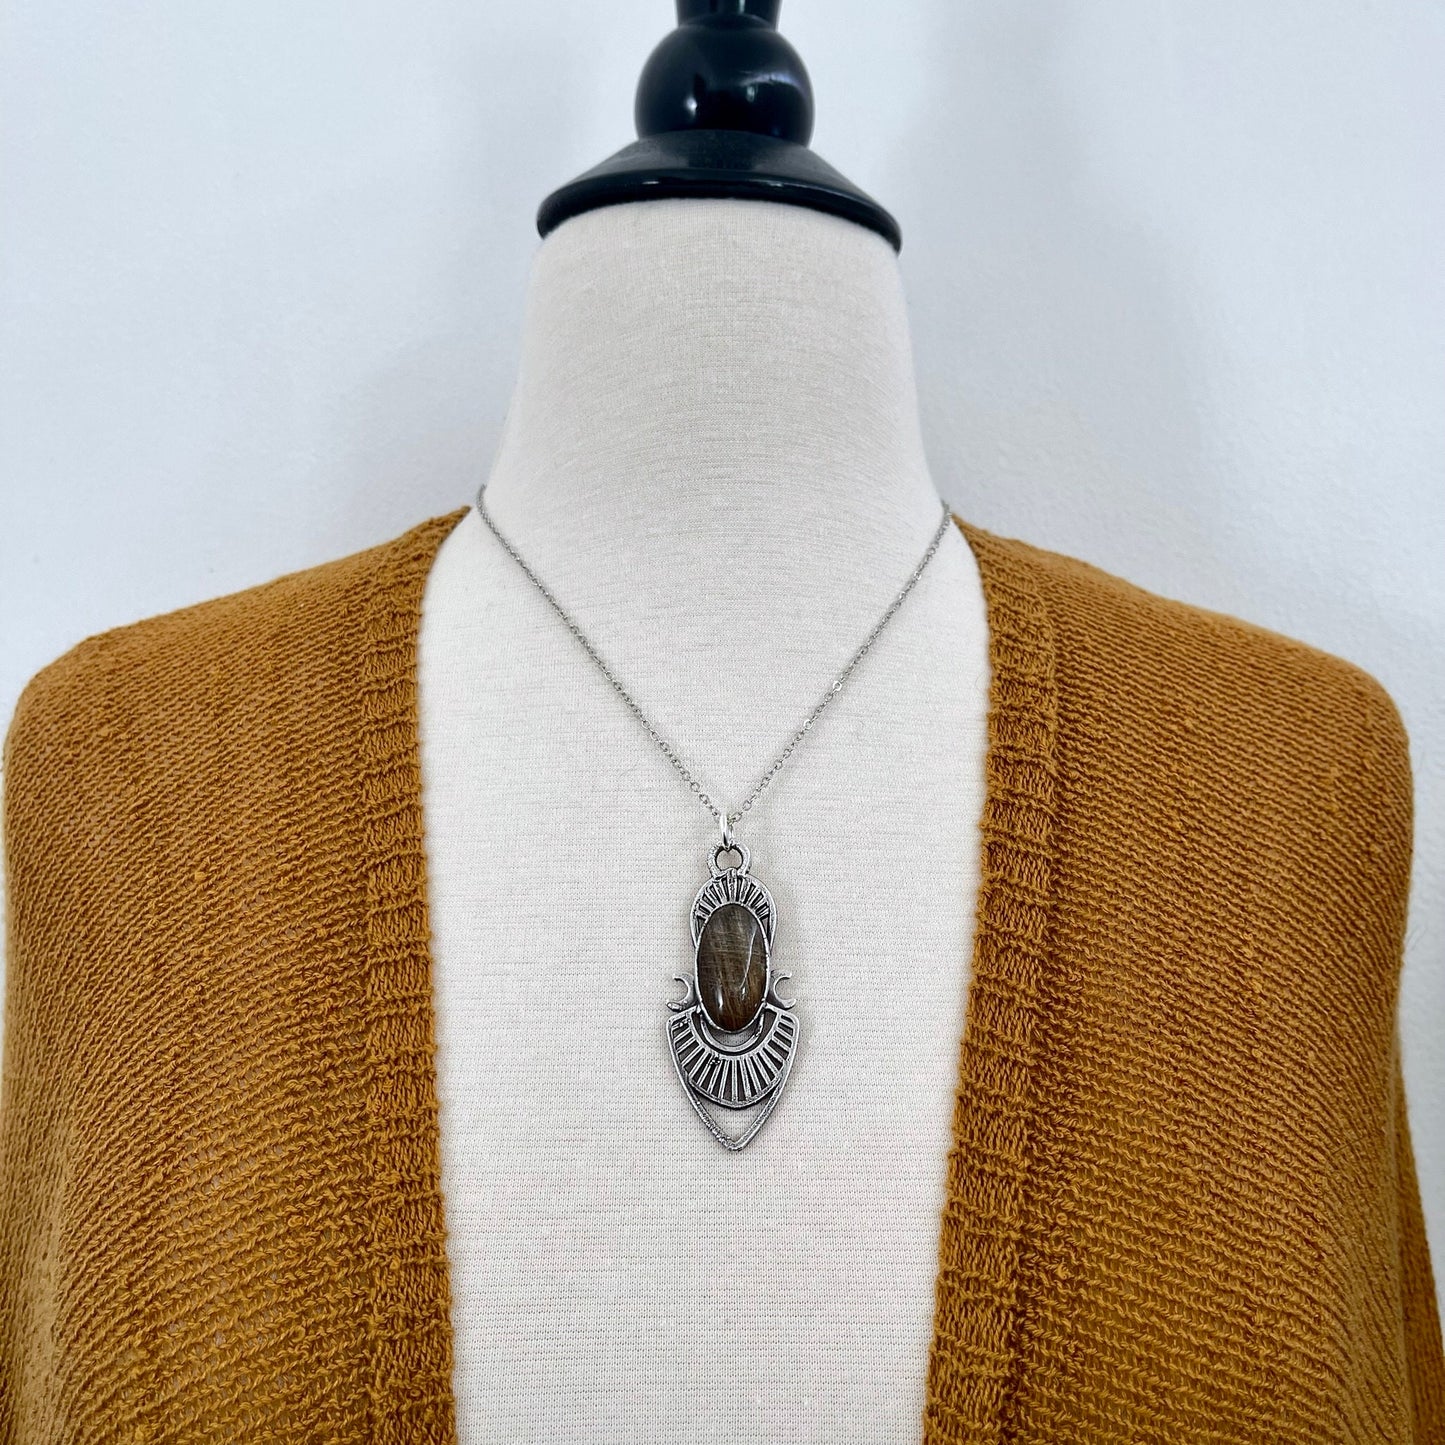 Moss & Moon Collection - Rutile Quartz Statement Necklace set in Fine Silver / One of a Kind - by Foxlark